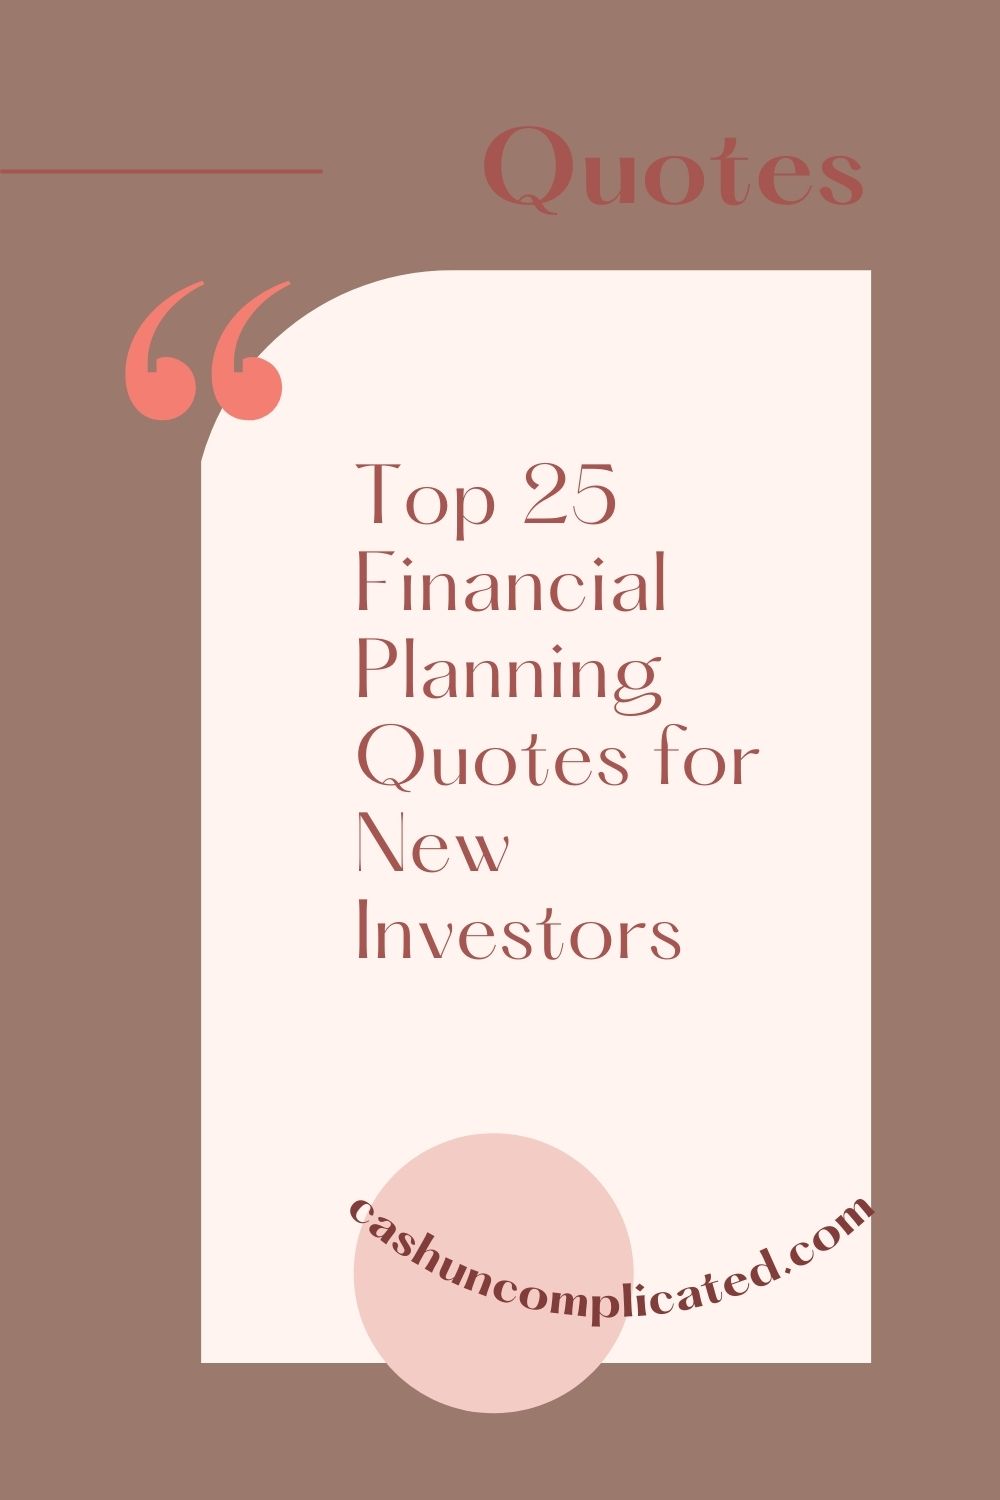 Top 25 Financial Planning Quotes for New Investors